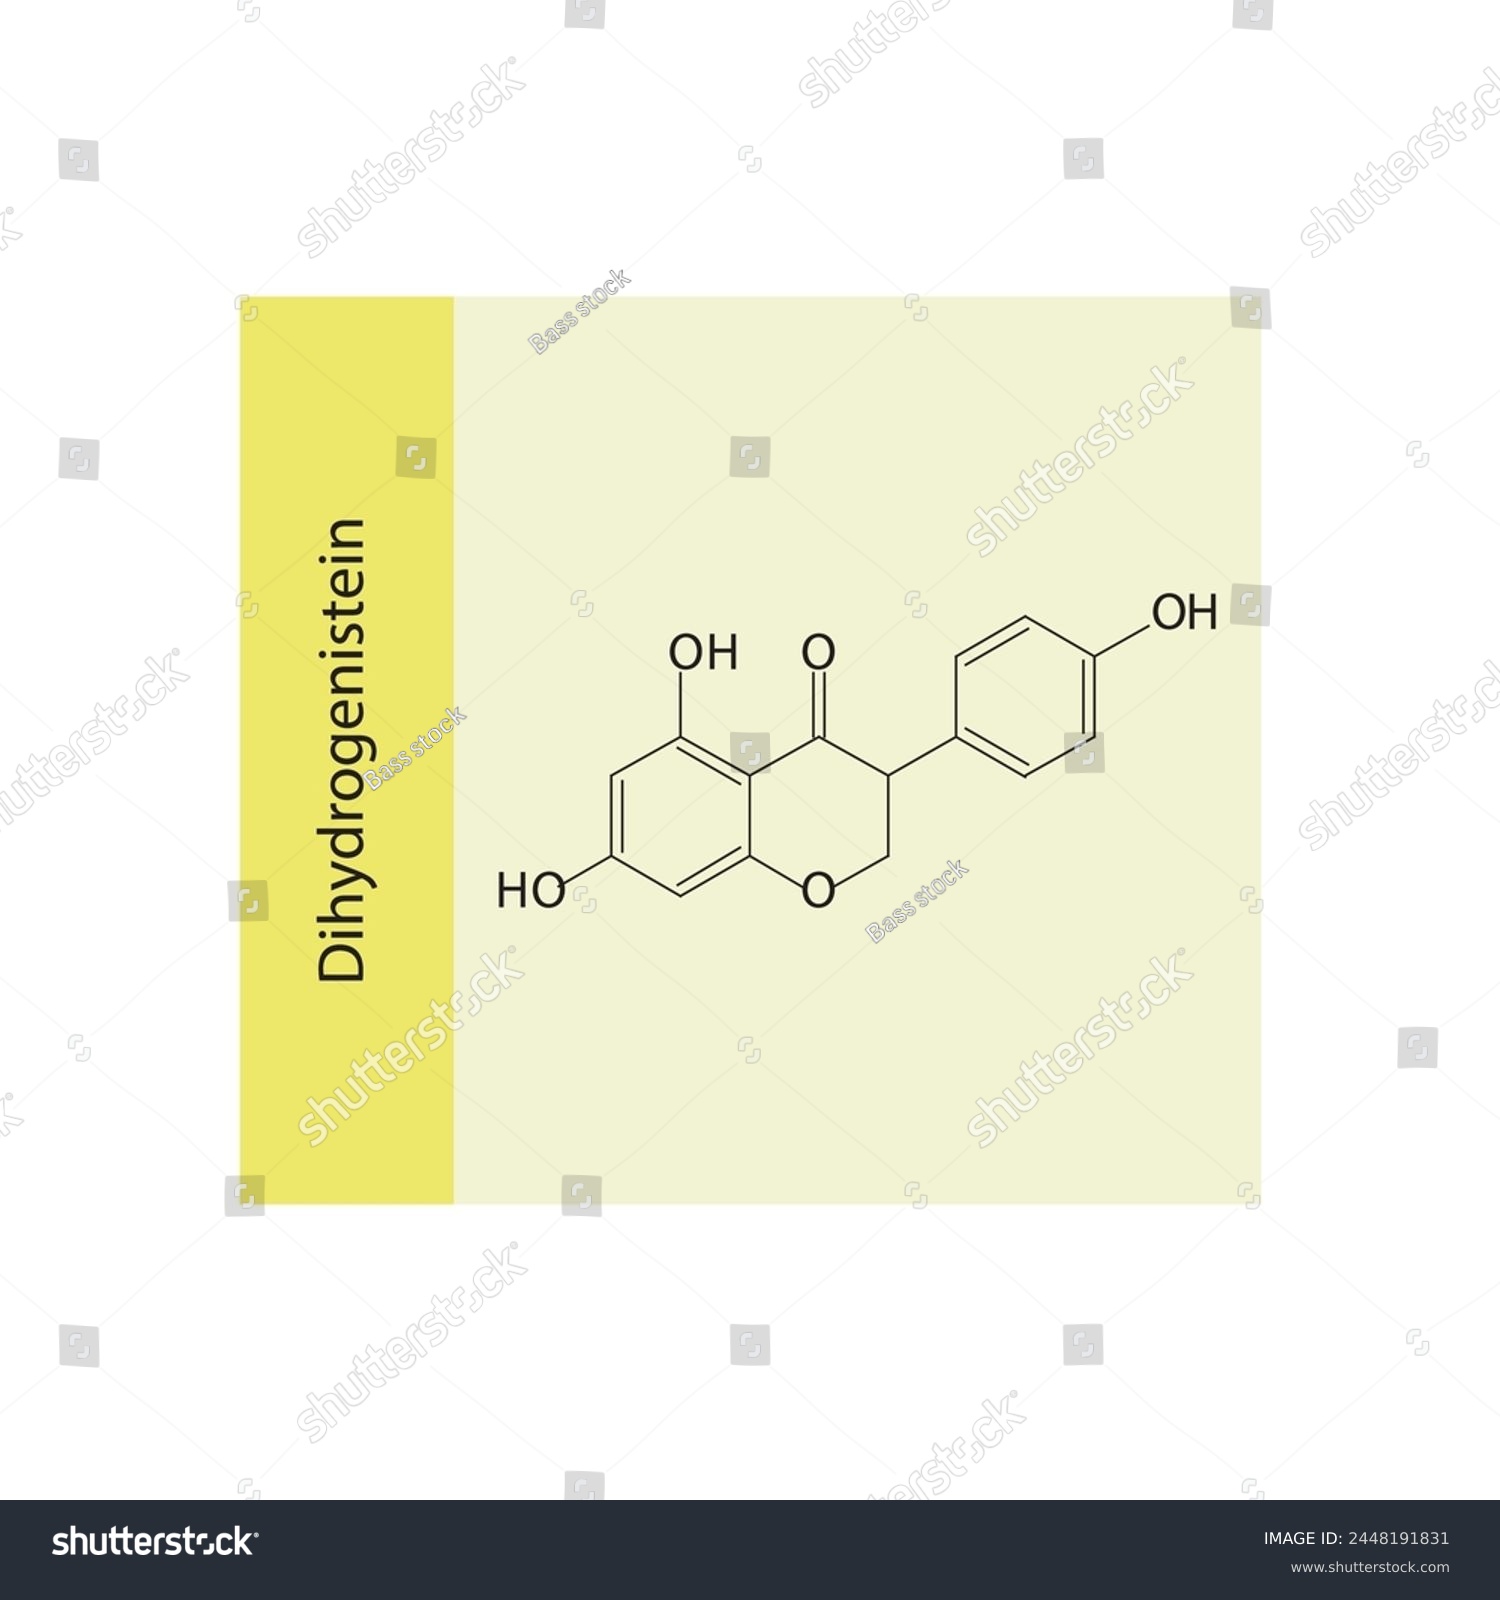 SVG of Dihydrogenistein skeletal structure diagram.Isoflavanone compound molecule scientific illustration on yellow background. svg